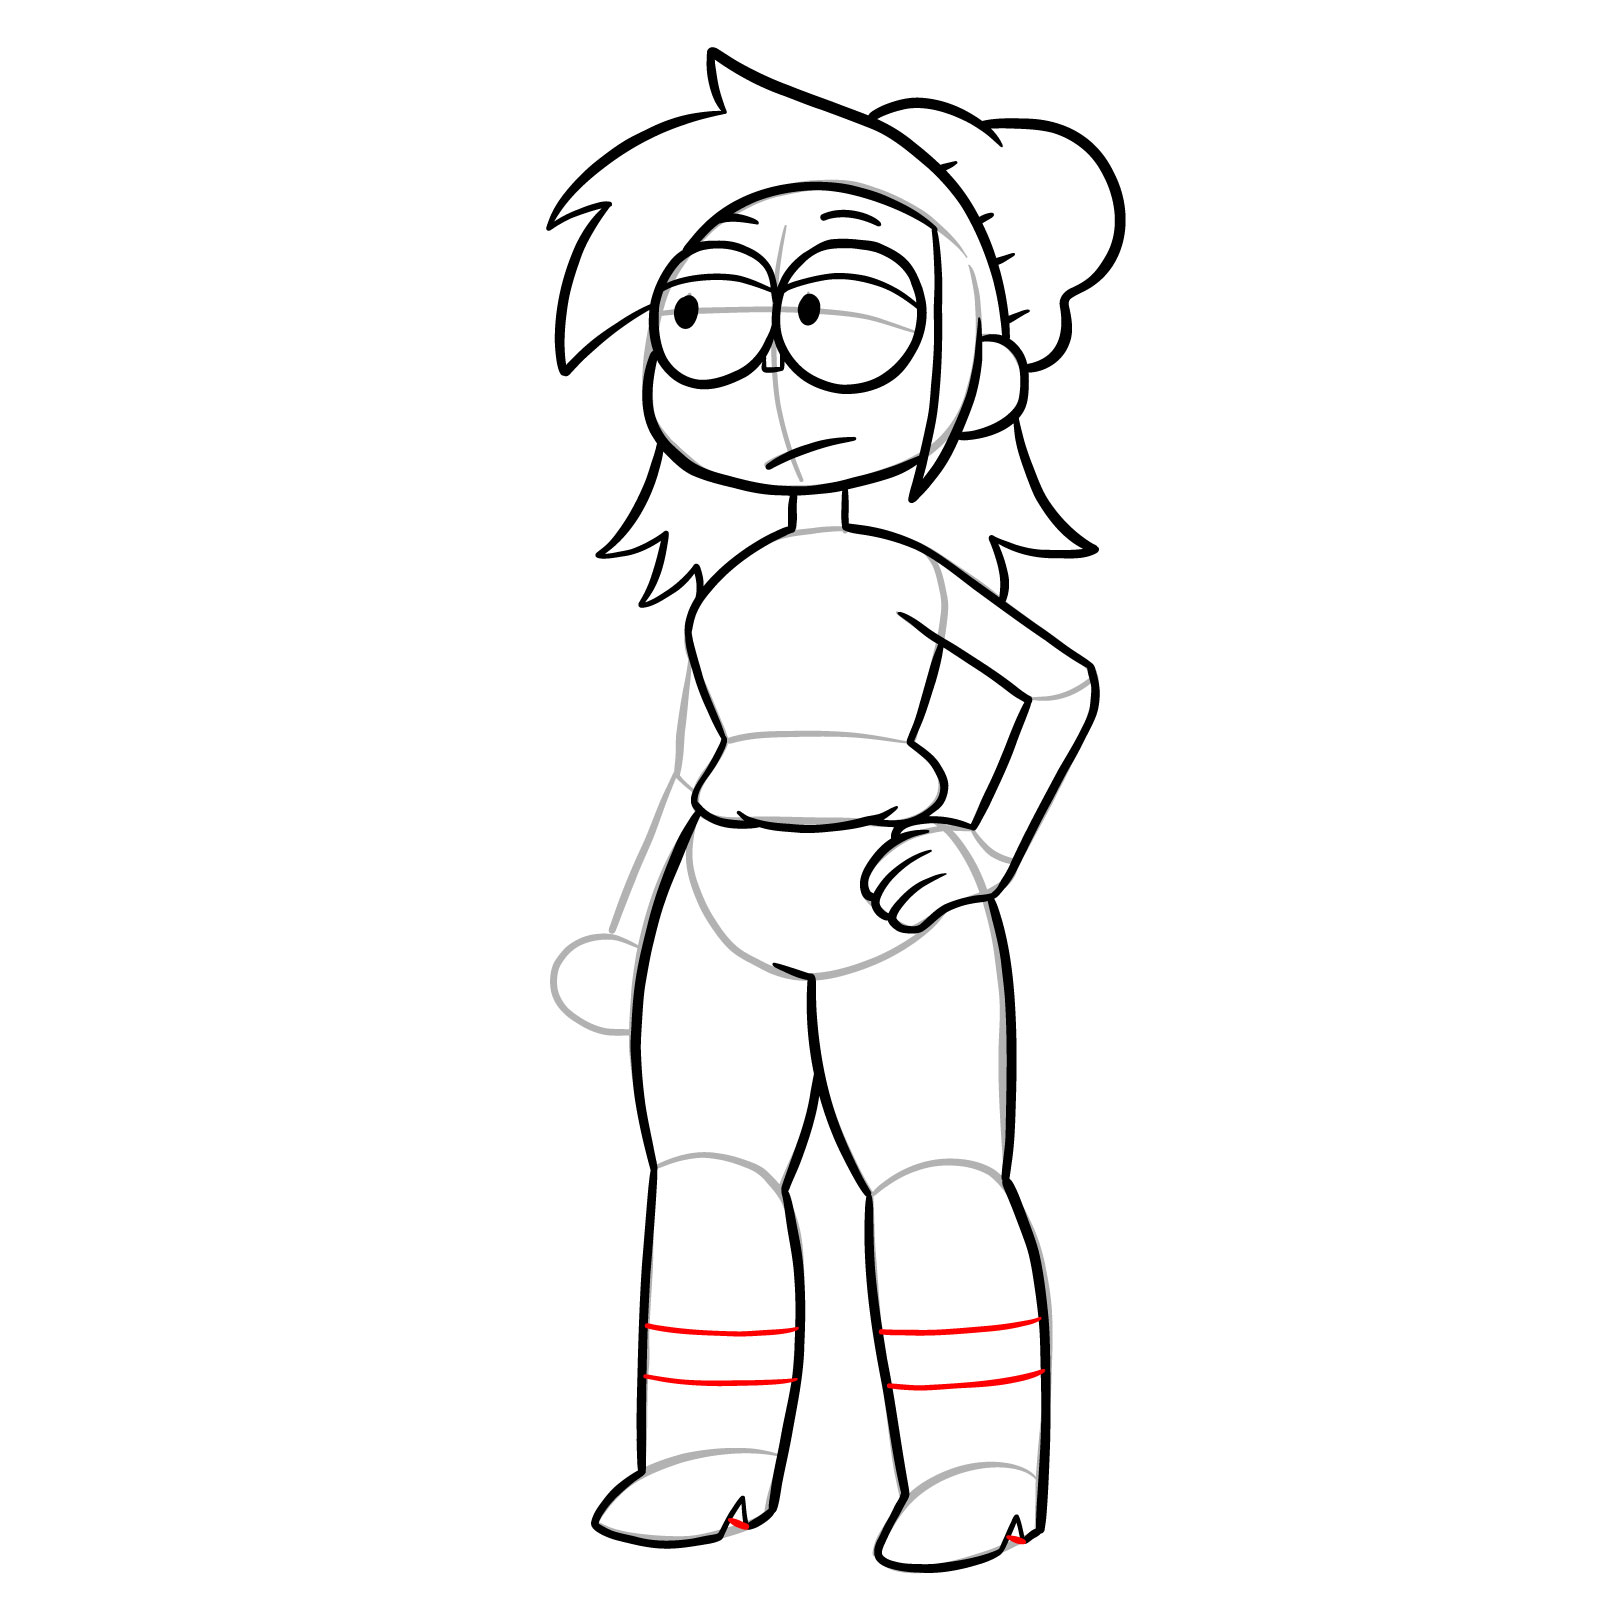 How to draw Actor Enid from OK K.O.! - step 22